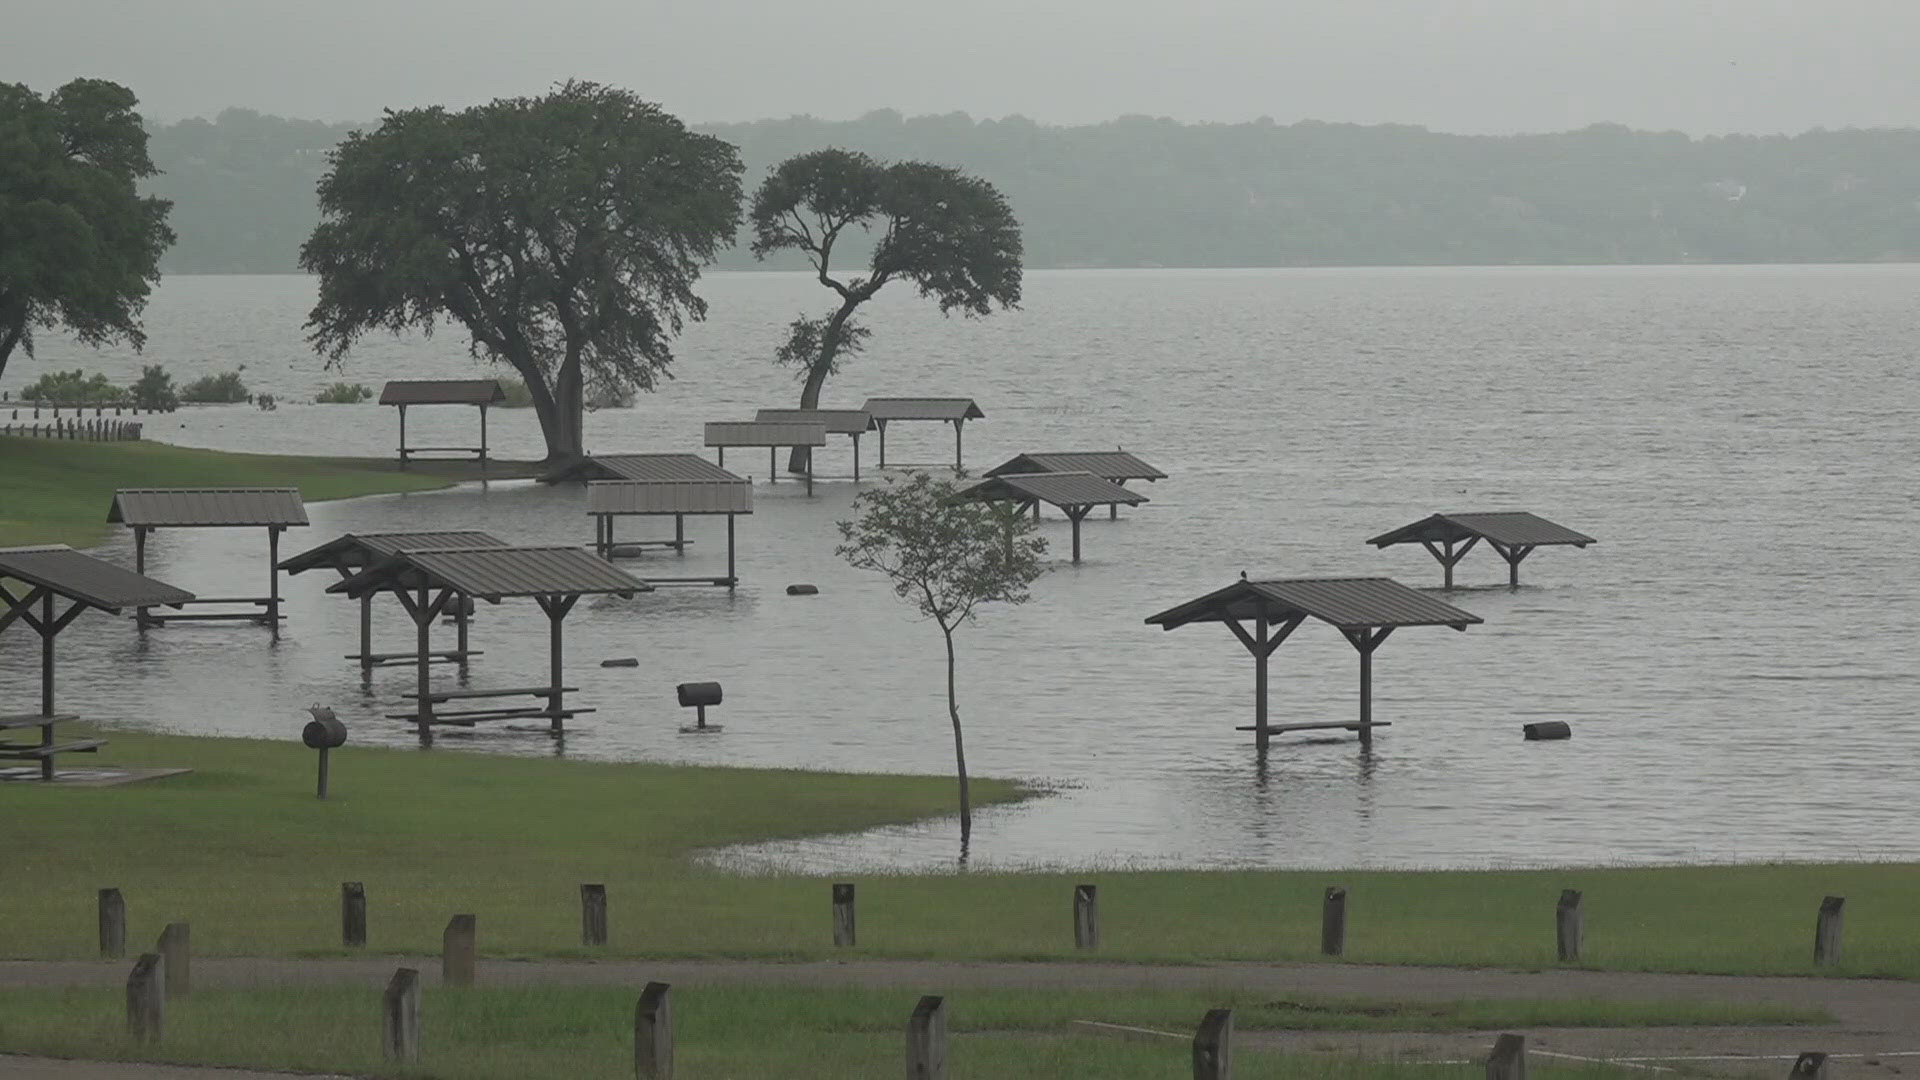 Belton Lake has not reached 100% capacity since 2021. For the Waco Lake, it has not been over capacity since 2018.